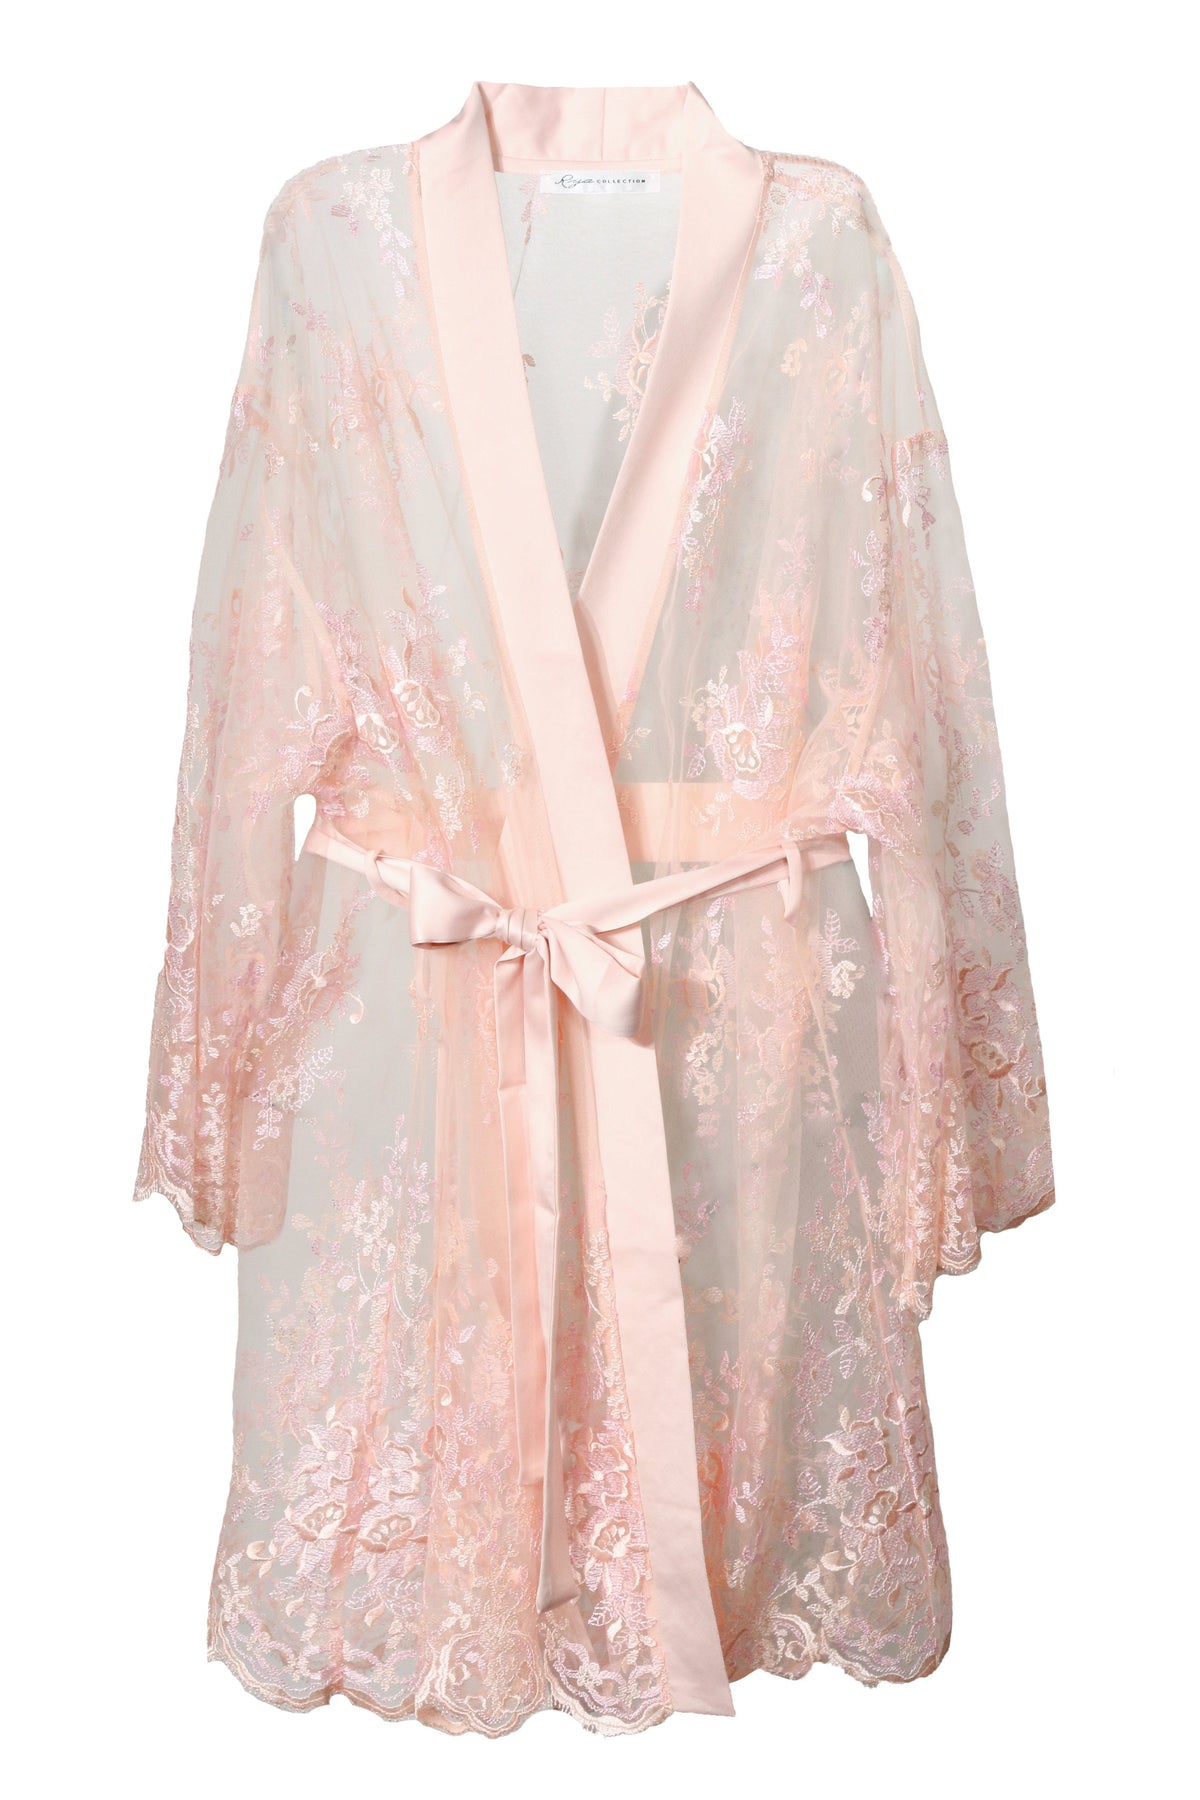 Rya Collection Robes Petal Pink / XS/S Darling Cover Up- Petal Pink